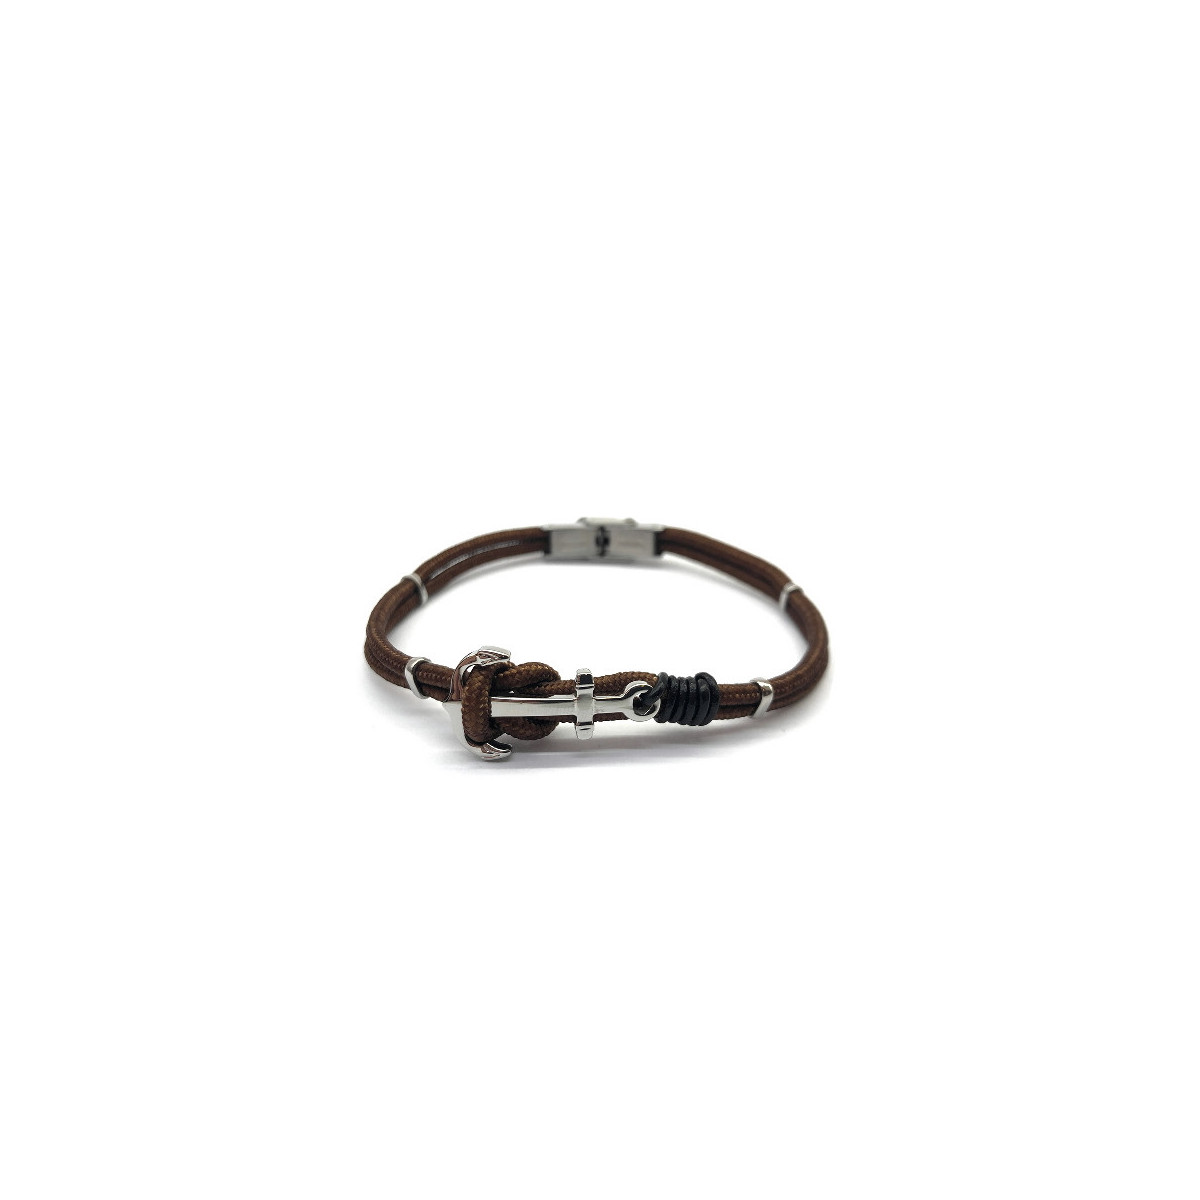 STAINLESS STEEL BRACELET WITH BROWN NYLON AND ANCHOR